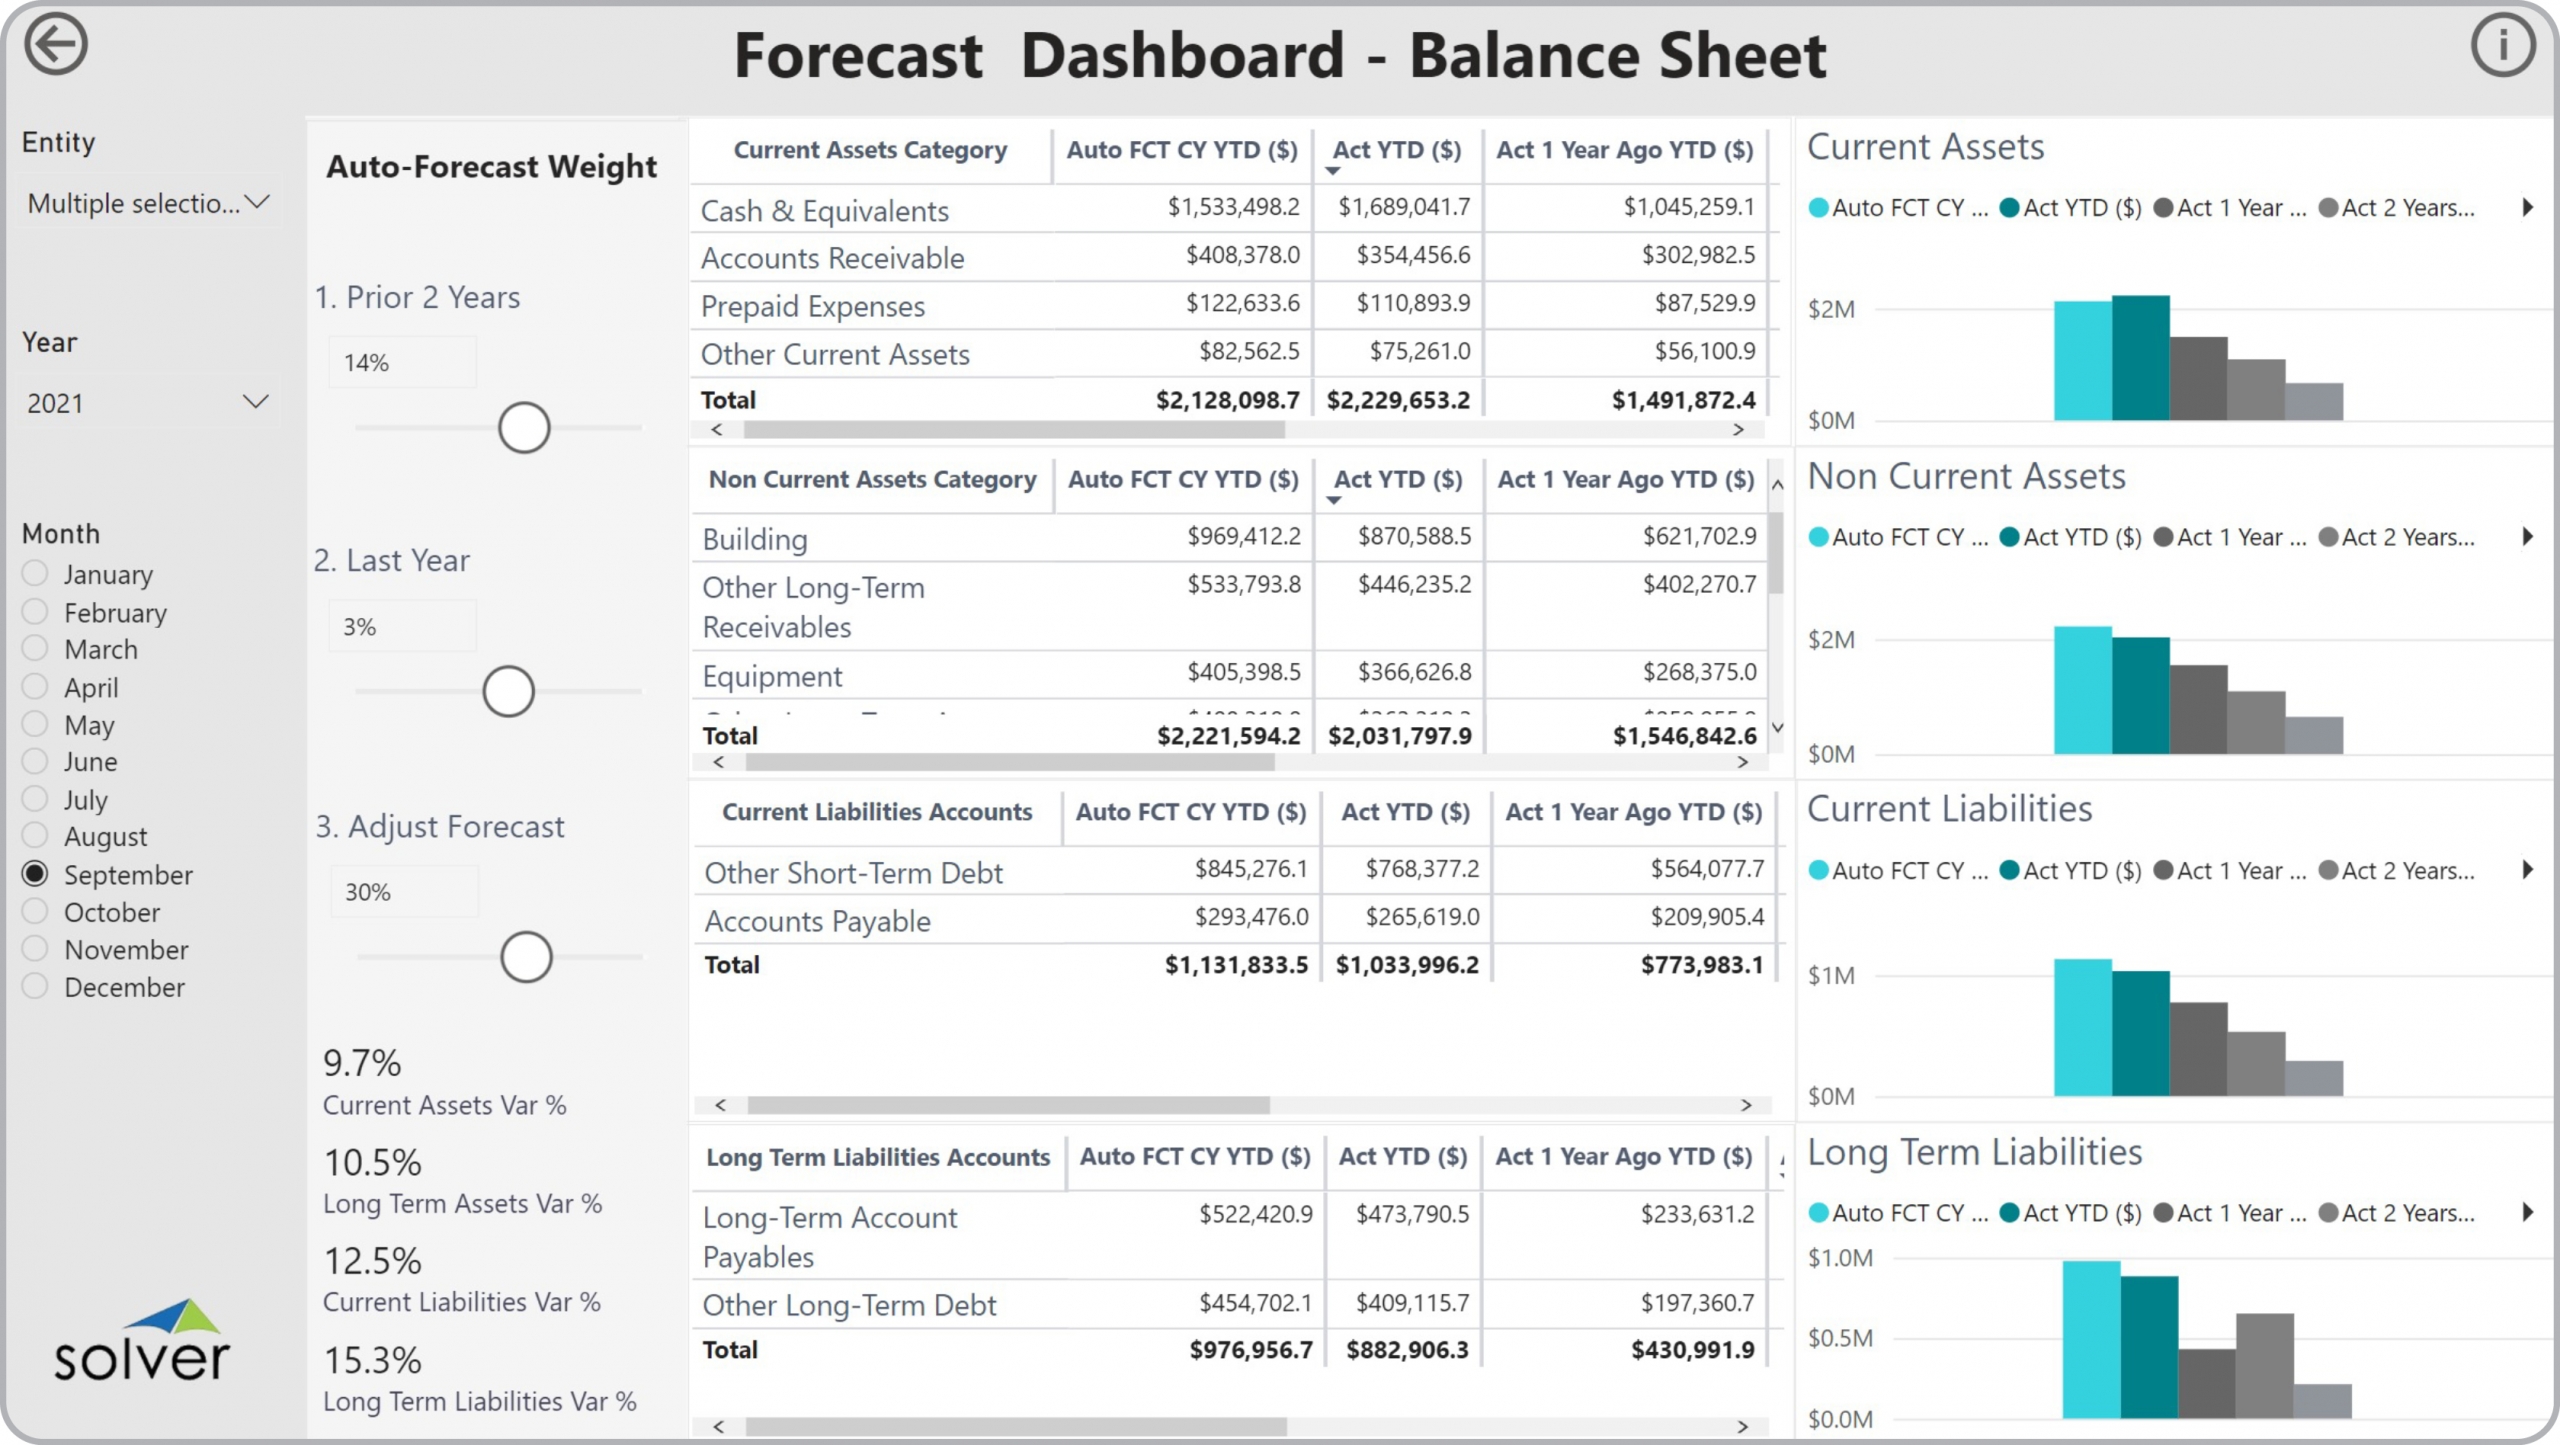 Example of a Balance Sheet Simulation Dashboard to Streamline the Modelling and Forecasting Process